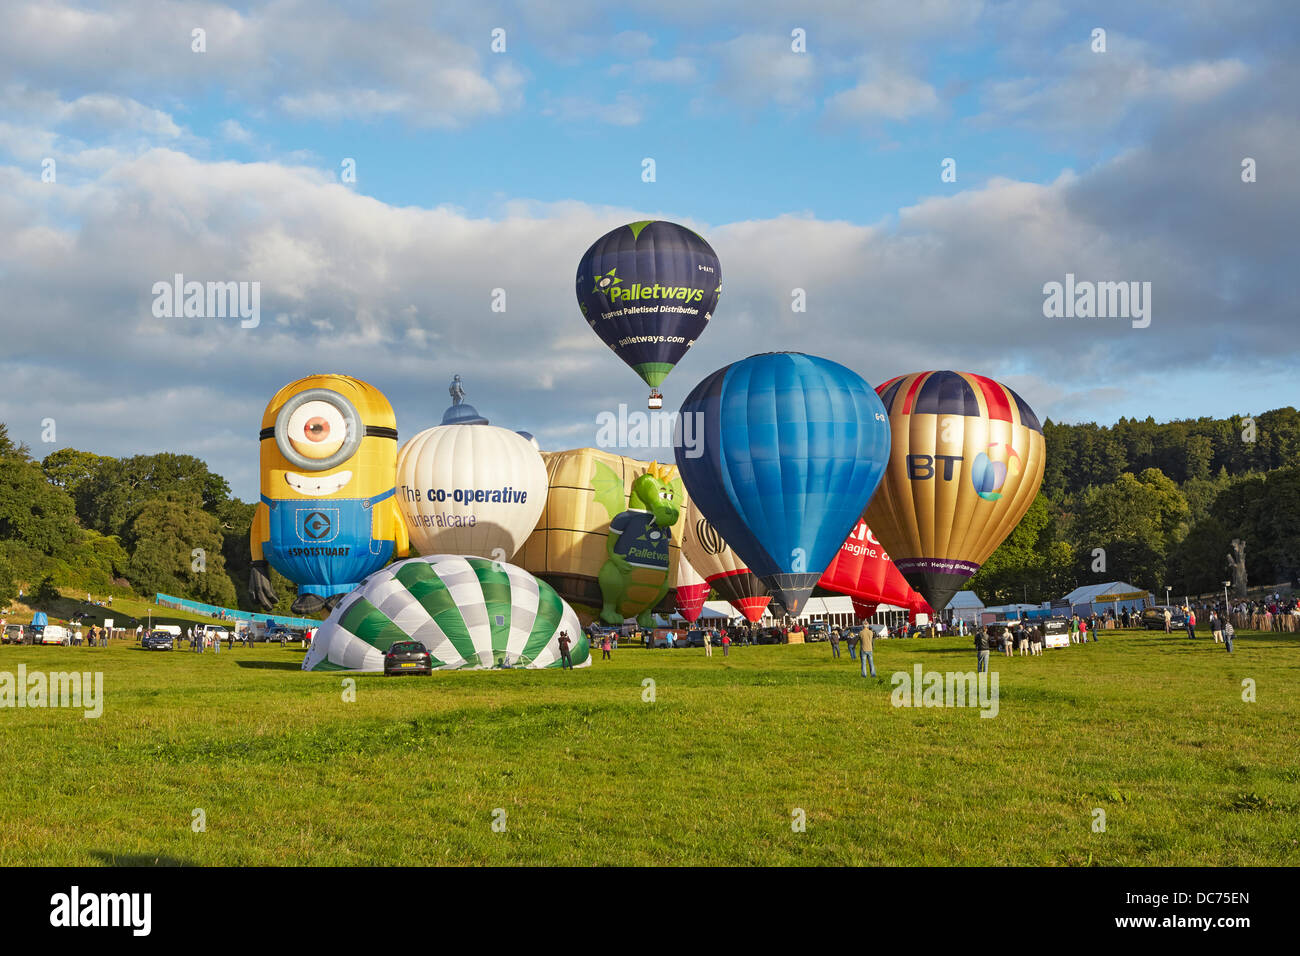 Bristol, UK. 9th Aug, 2013. Balloons at the 35th UK Bristol balloon fiesta at the Ashton court estate Morning launch launch on the 9th August 2013 including the BT FT Ricoh Palletways an Despicable Me Stuart minion balloons Credit:  David Lyon/Alamy Live News Stock Photo